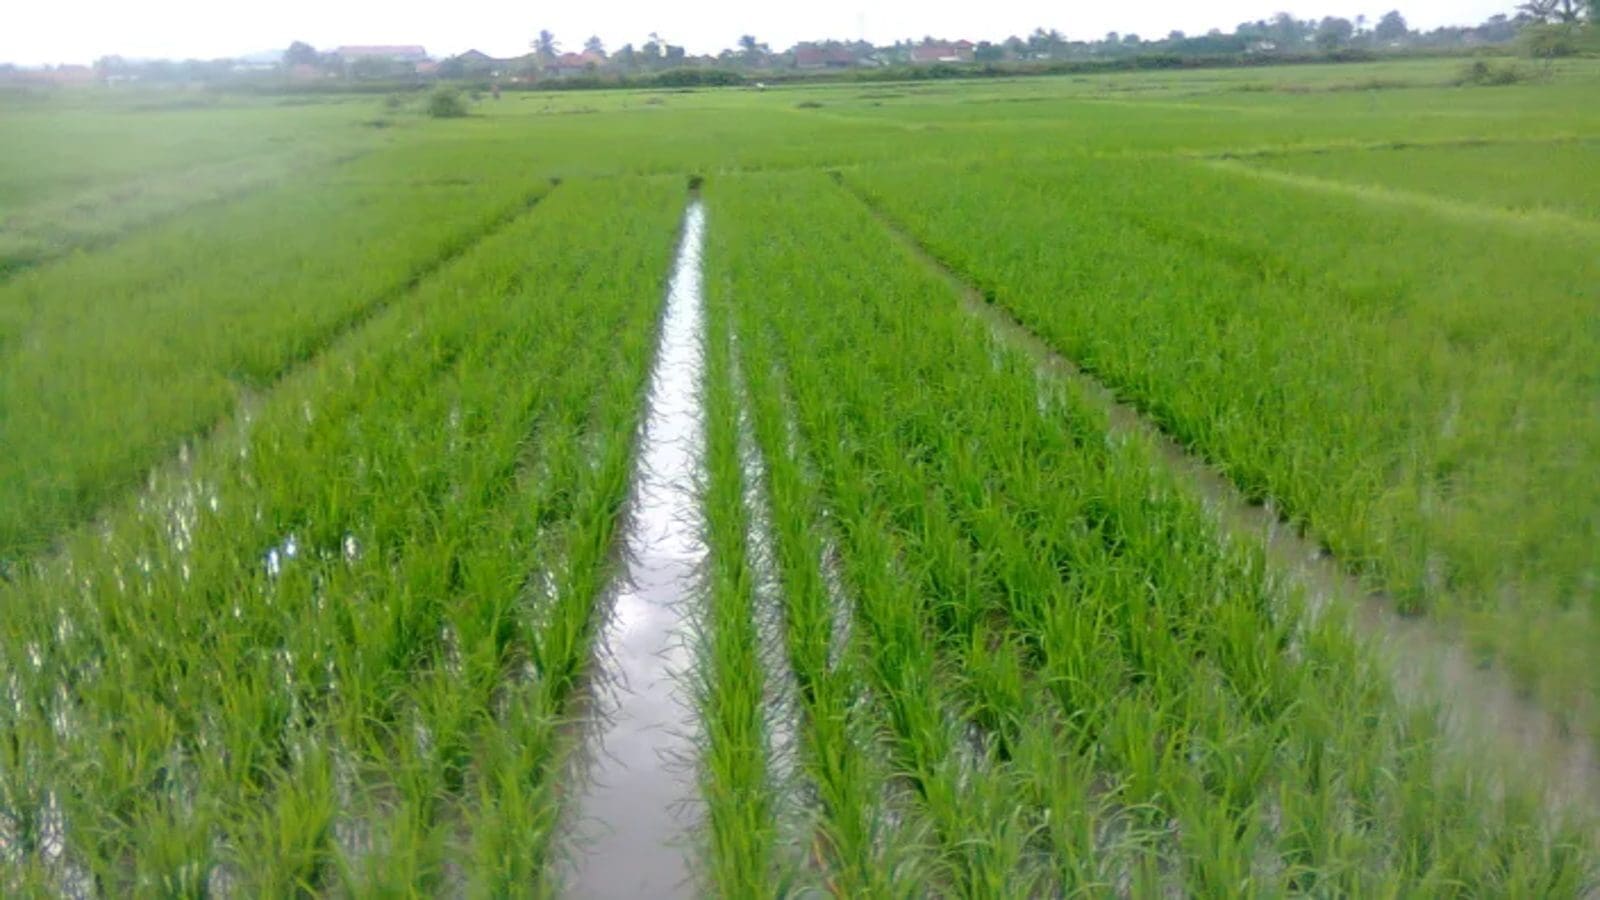 FAO spearheads adoption of new rice production technology in Tanzania in push to raise yields and boost farmer incomes